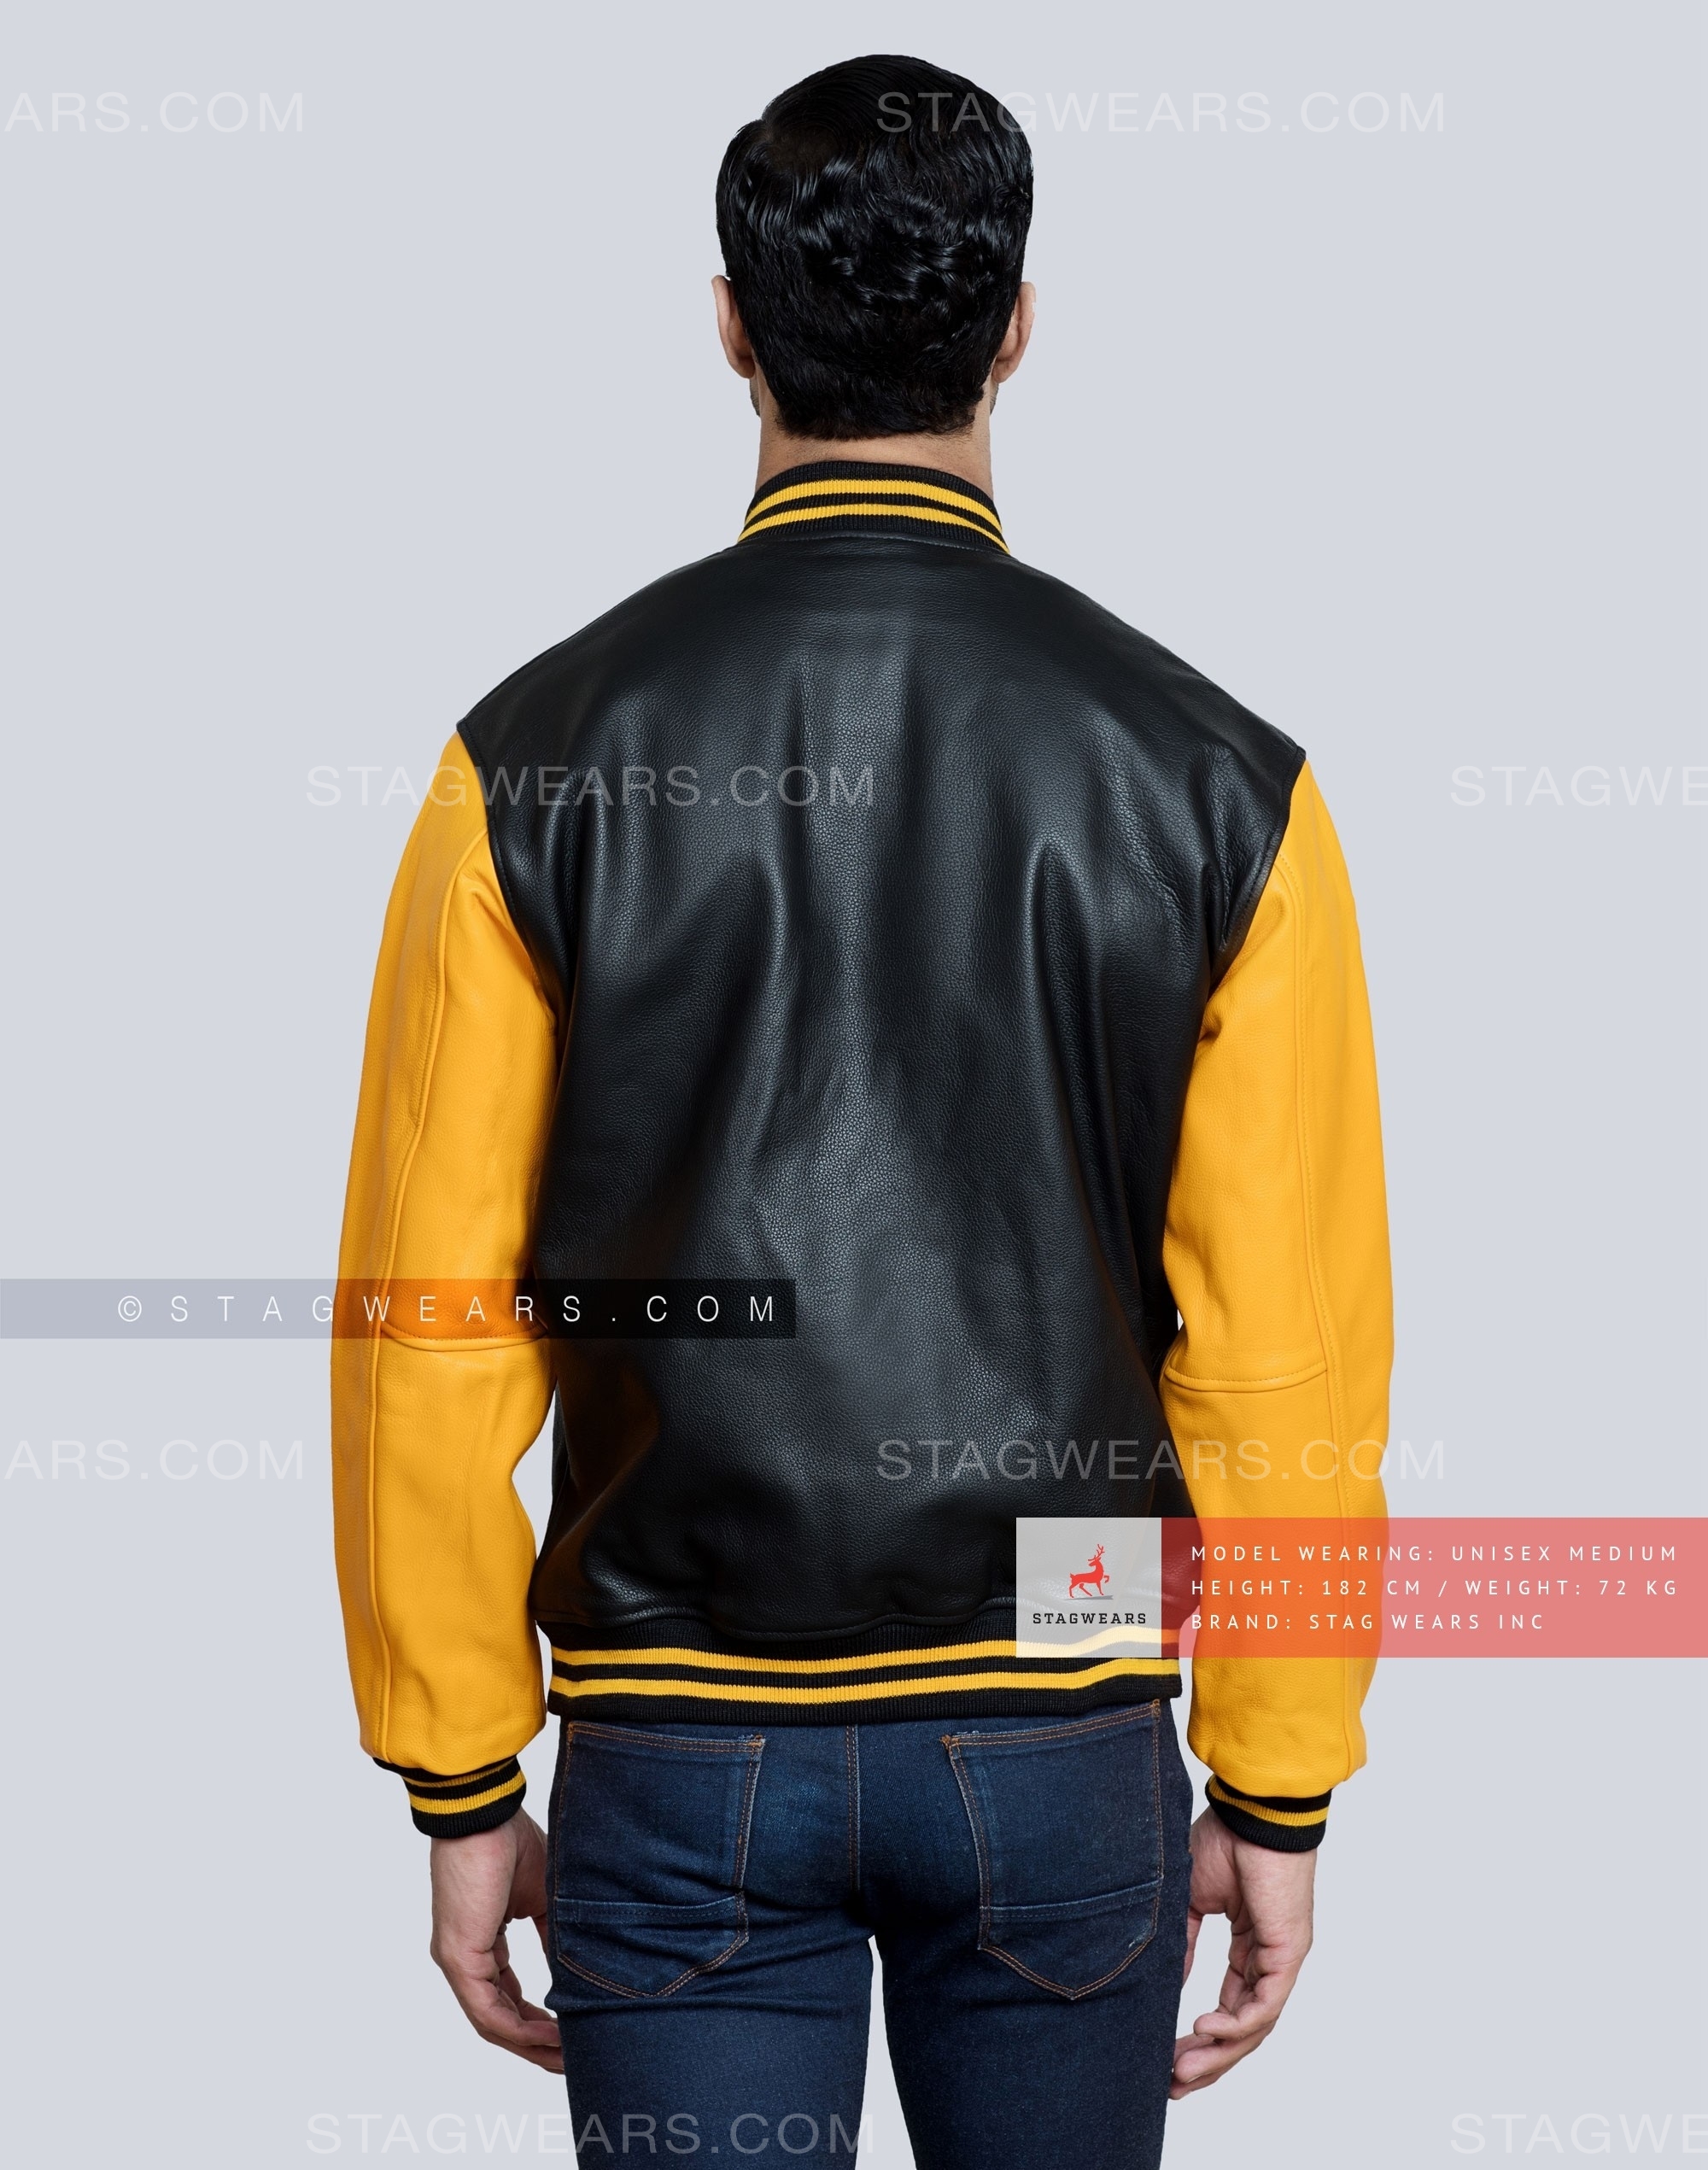 Black And Gold All Leather Varsity Jacket Gets You An Exceptional Look